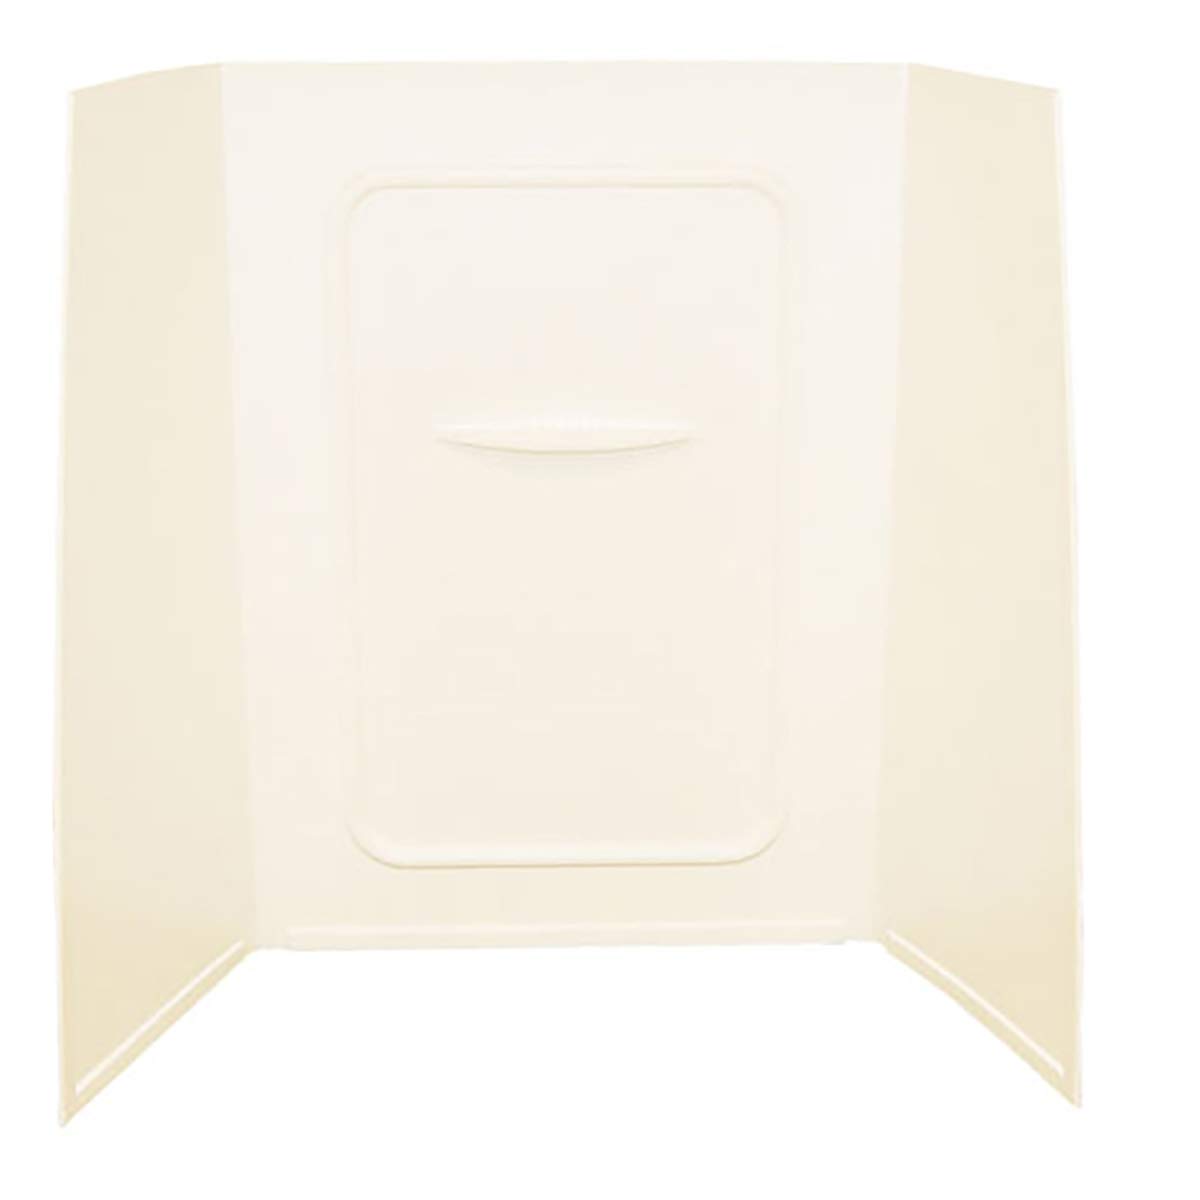 24IN X 38IN X 56IN BATHTUB & SHOWER PAN SURROUND; 1PIECE DESIGN; PICTURE FRAME FINISH  PARCHMENT